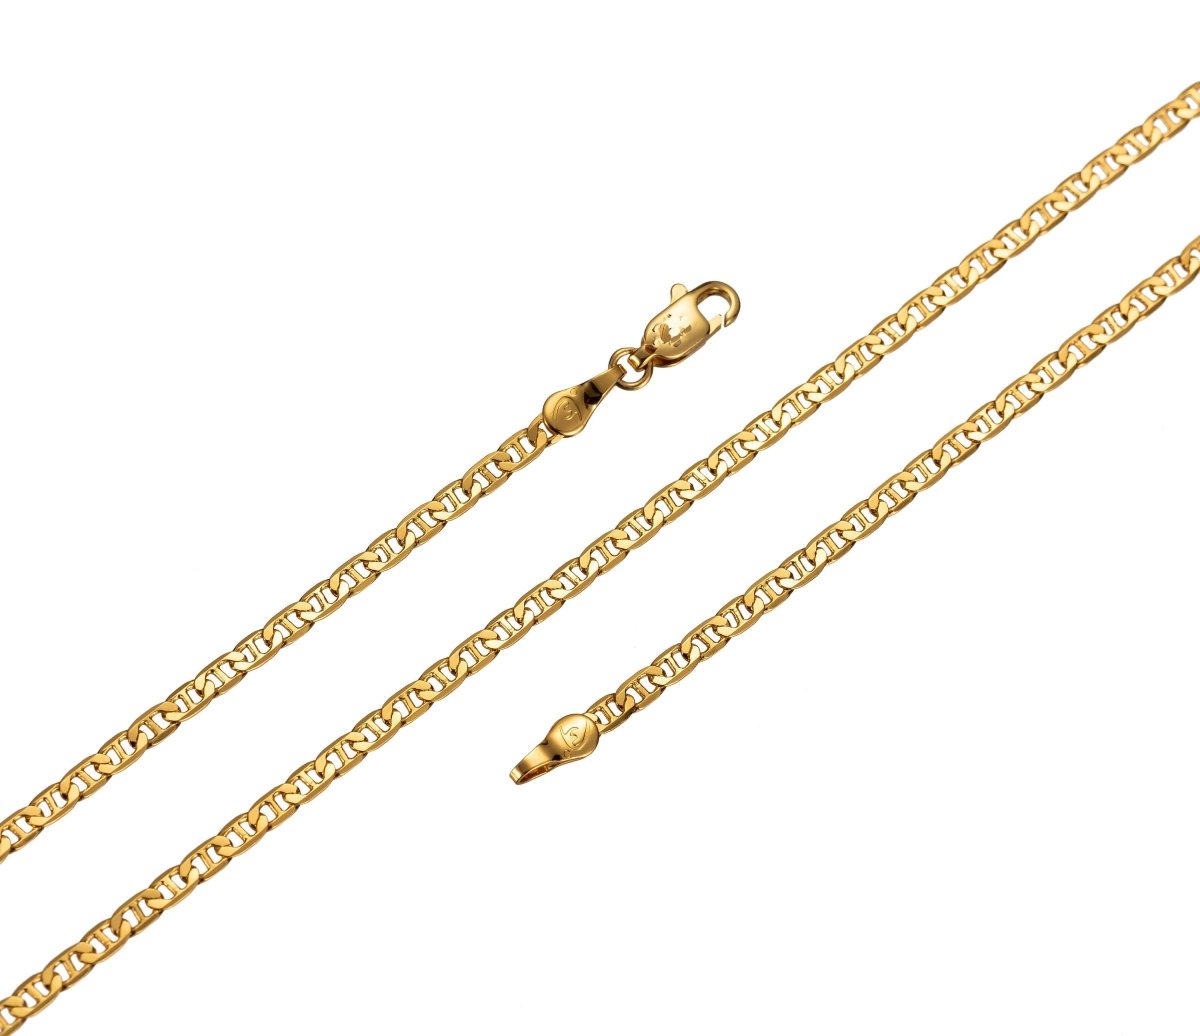 24K Gold Filled Necklace, 2.7mm in Width, 23.5 inches Mariner Chain w/ Lobster Clasps | CN-399 - DLUXCA